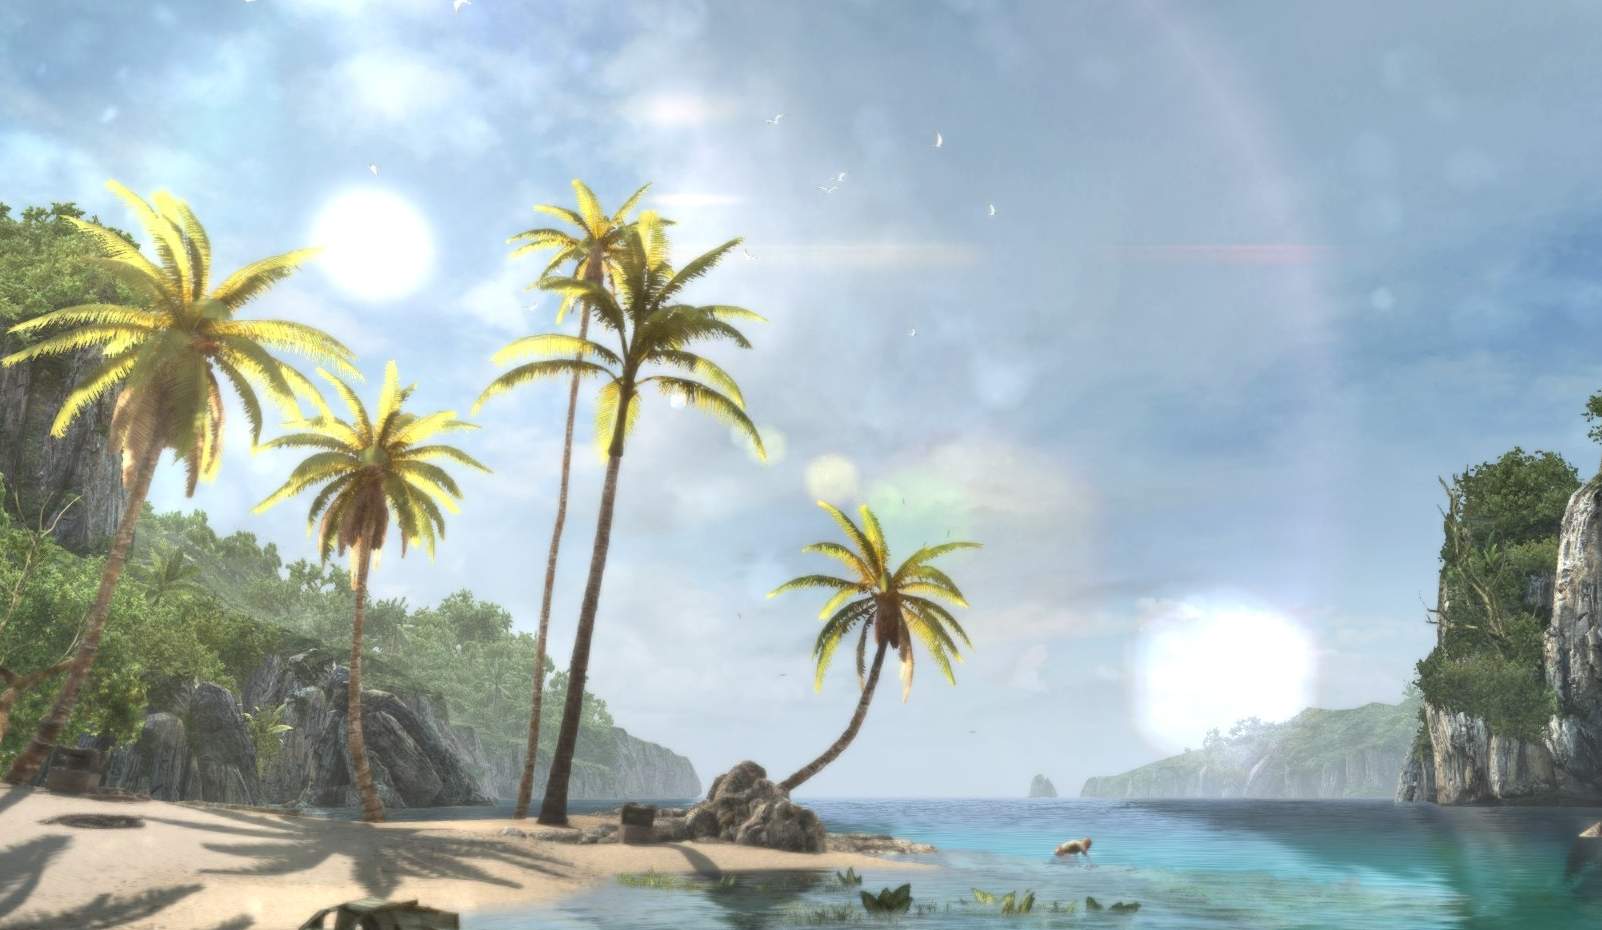 Assassin S Creed Iv Black Flag Mayan Stela Stones Locations Guide